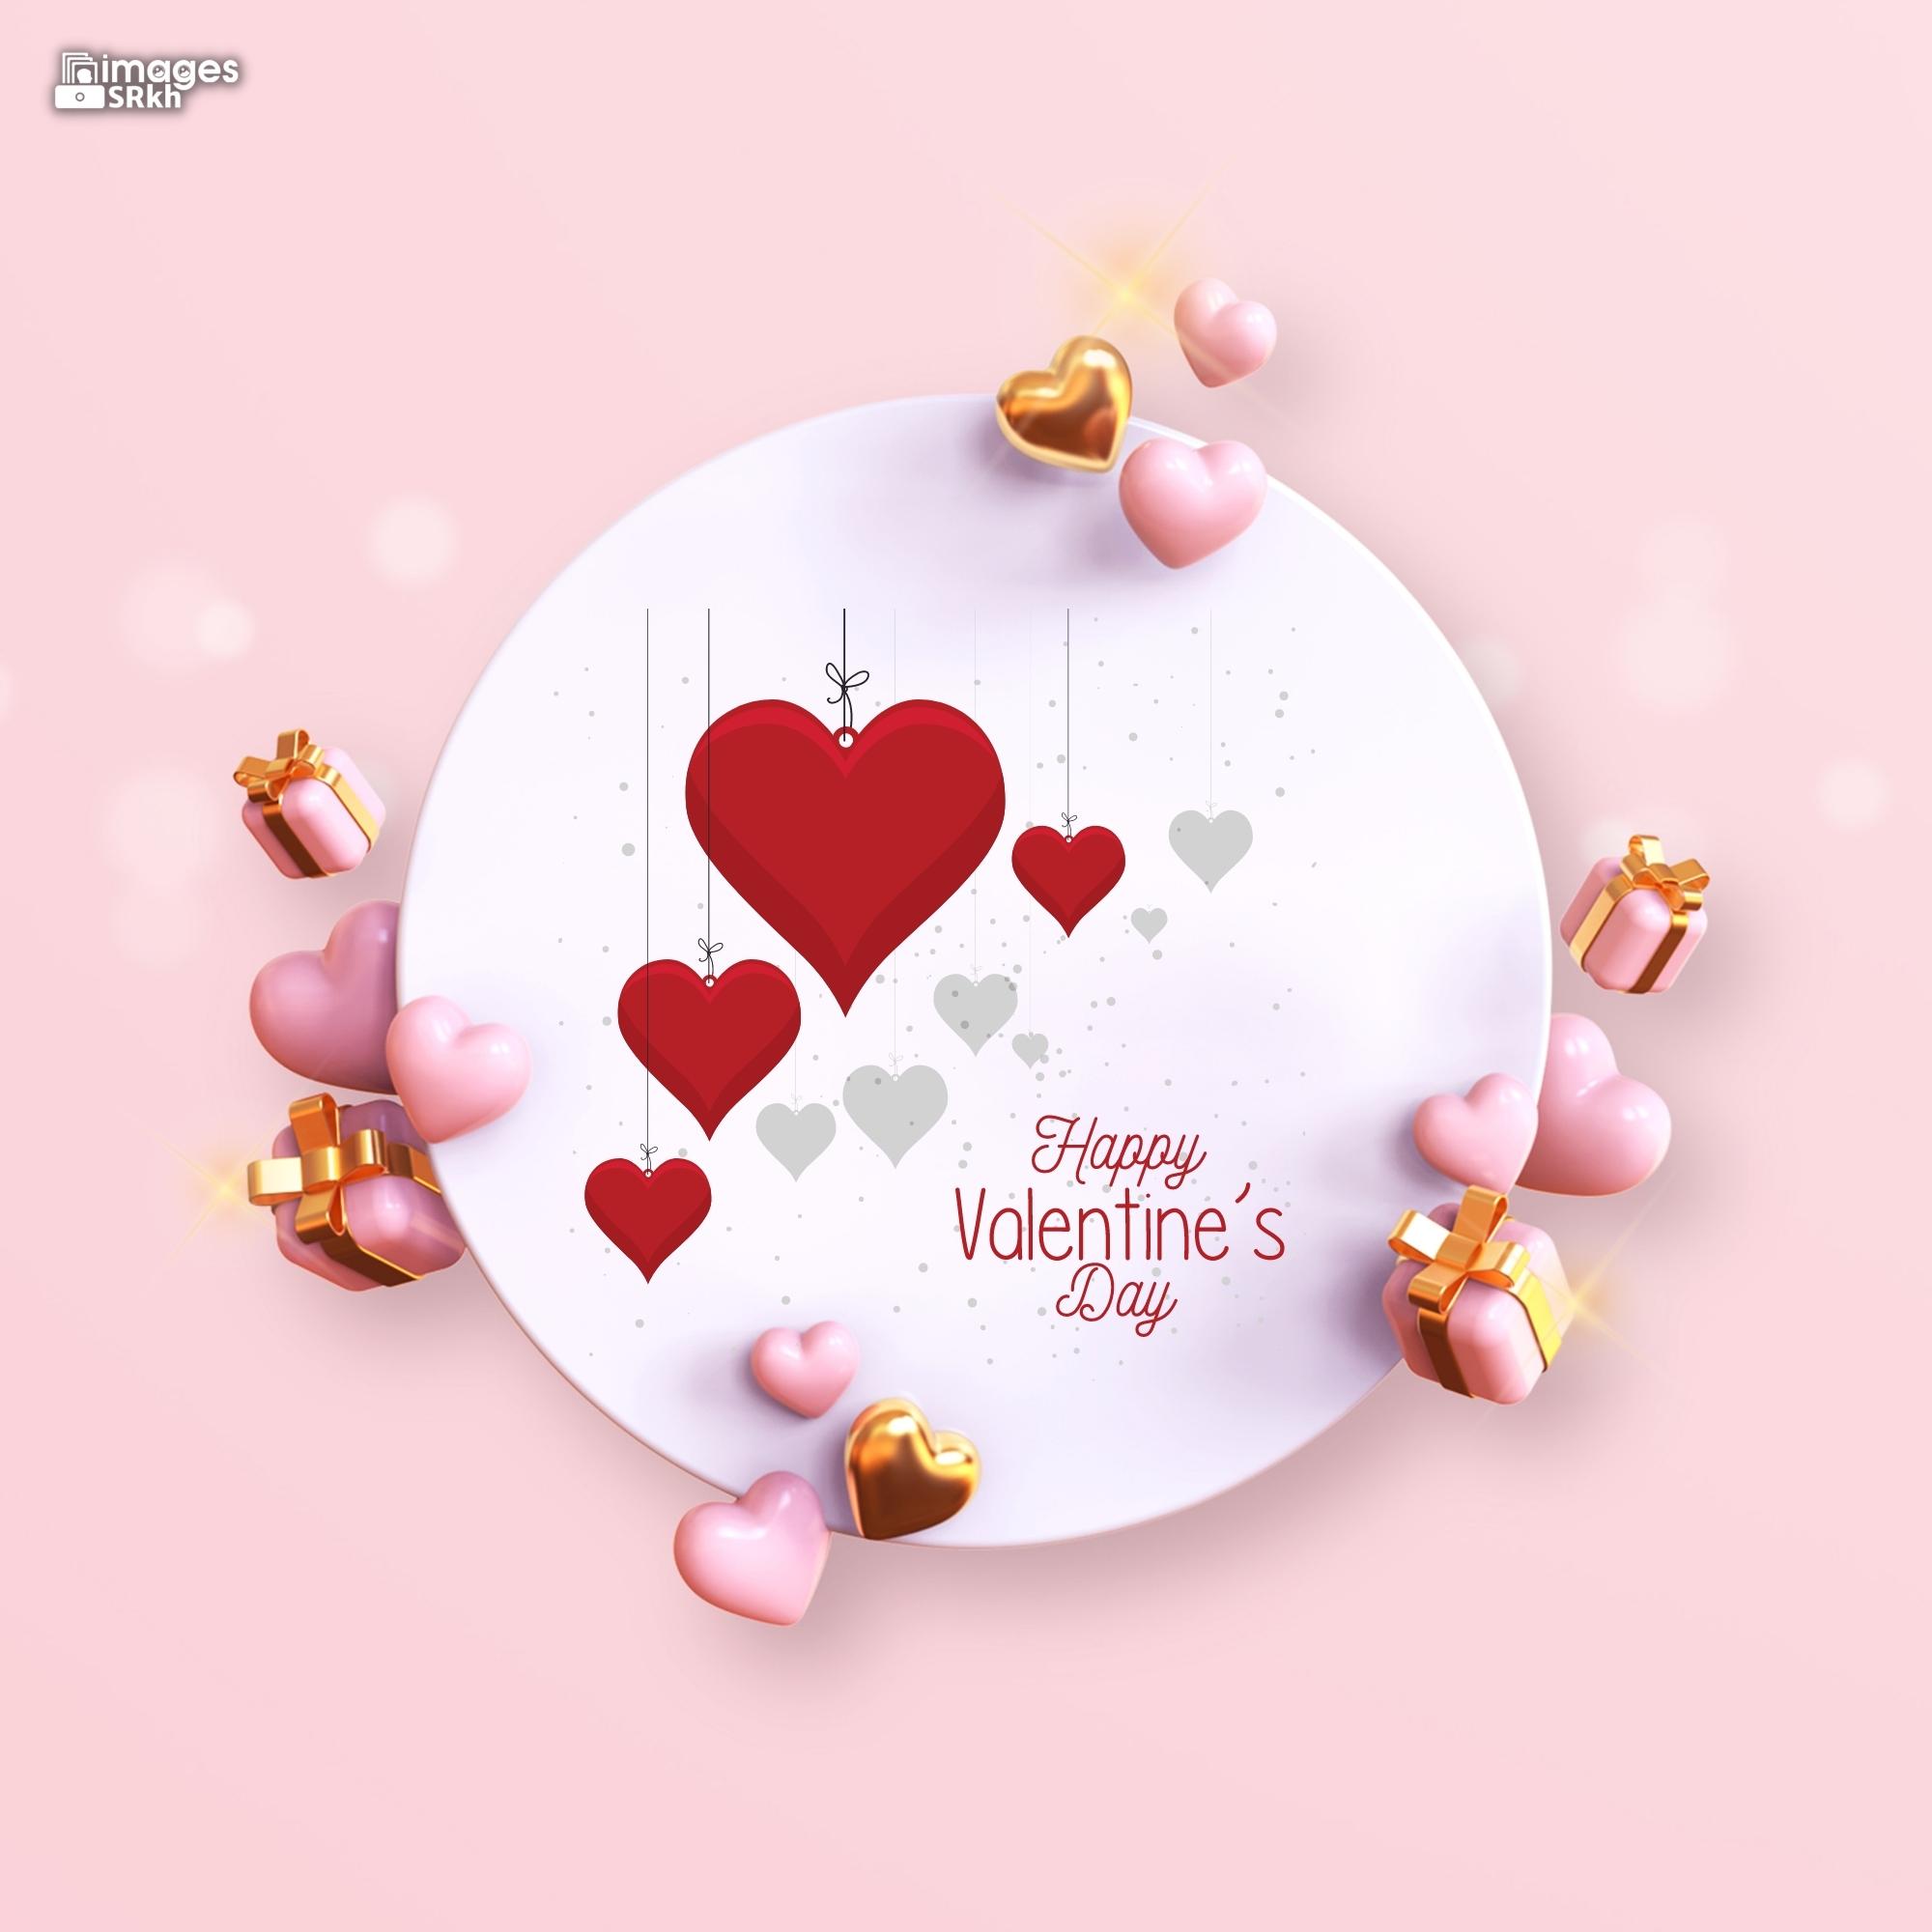 Happy Valentines Day | 459 | PREMIUM IMAGES | Wishes for Love